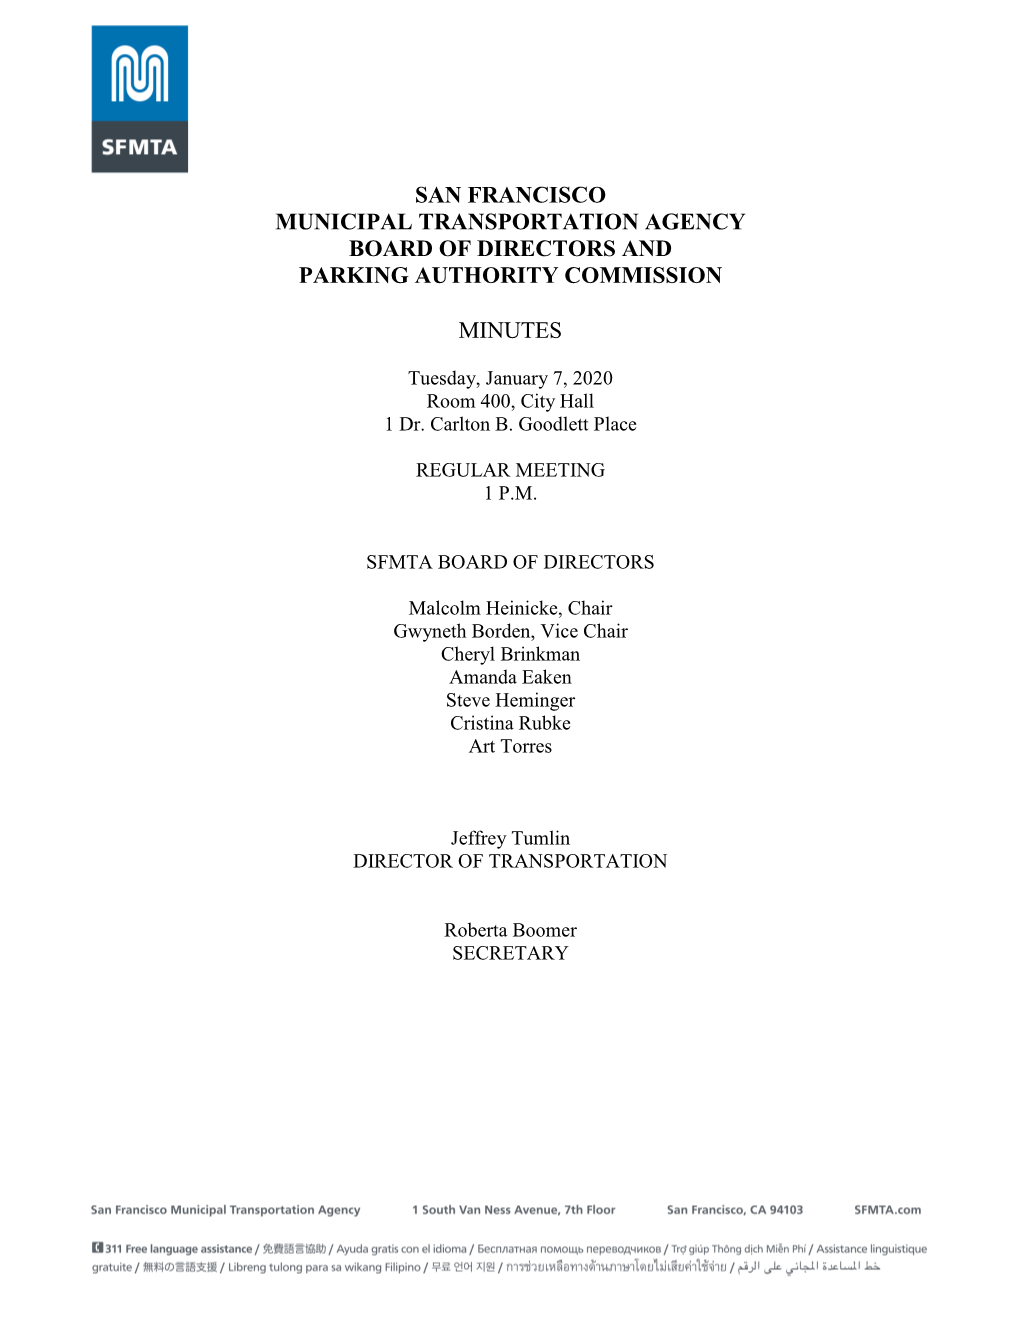 San Francisco Municipal Transportation Agency Board of Directors and Parking Authority Commission Minutes